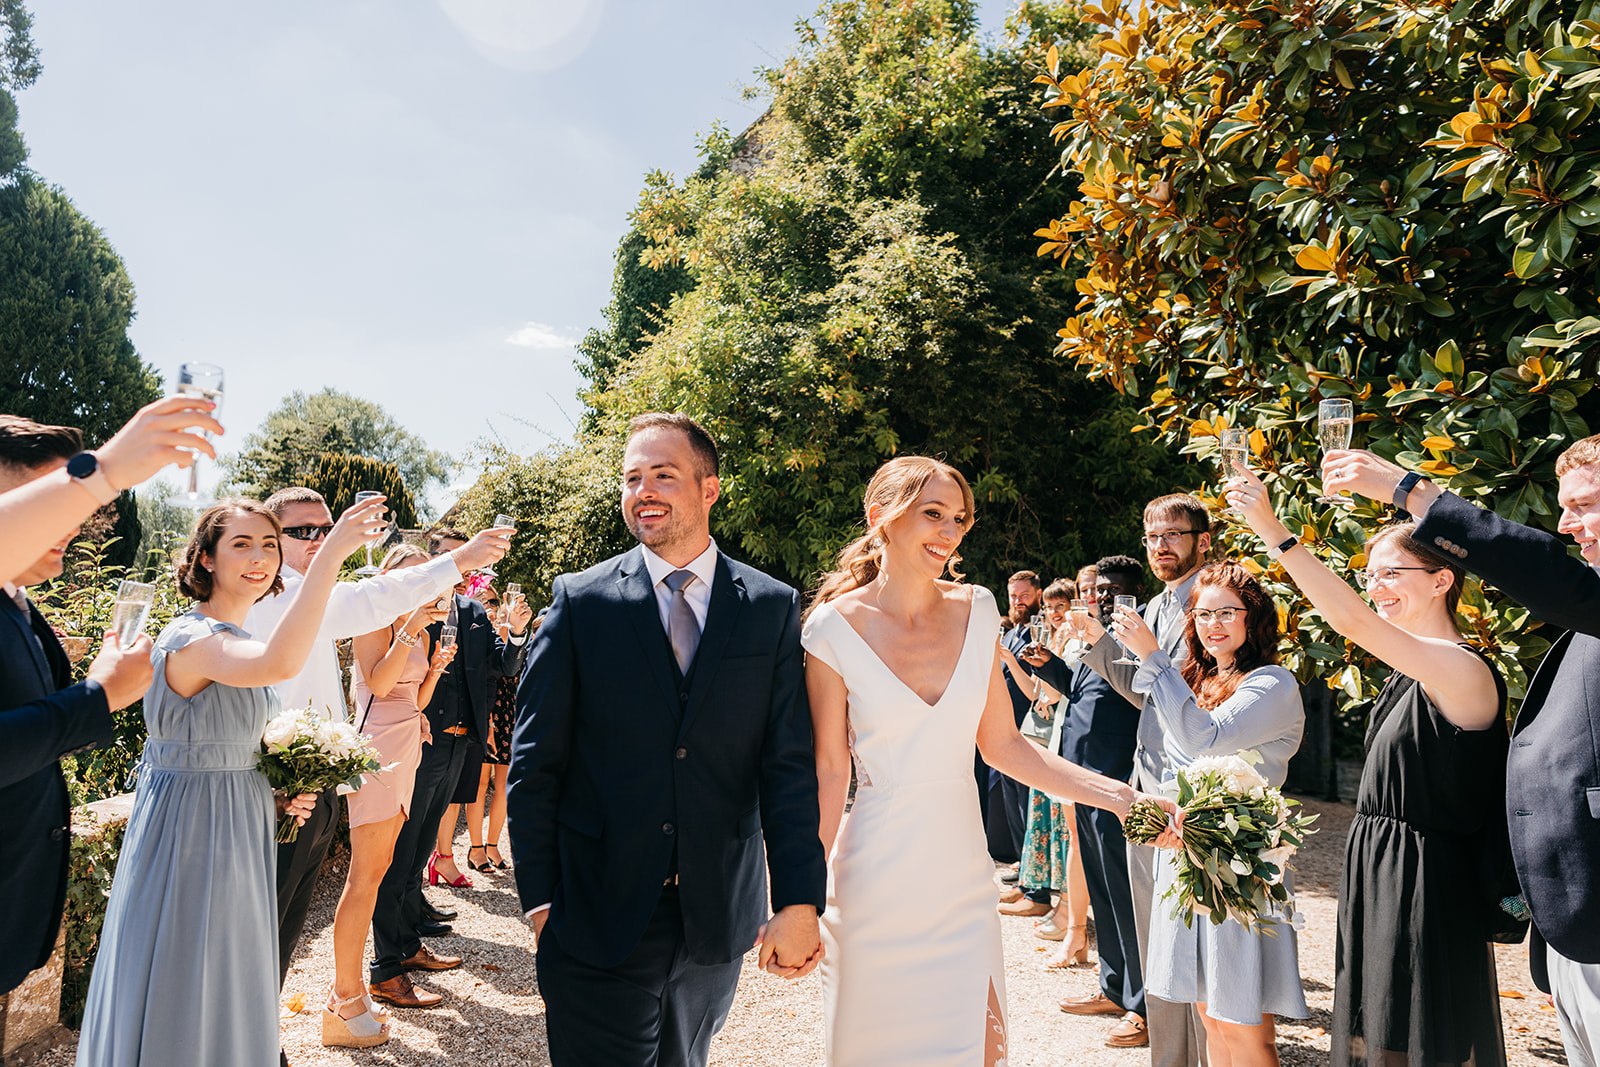 A Champagne walk through in the sunshine in place of the confetti